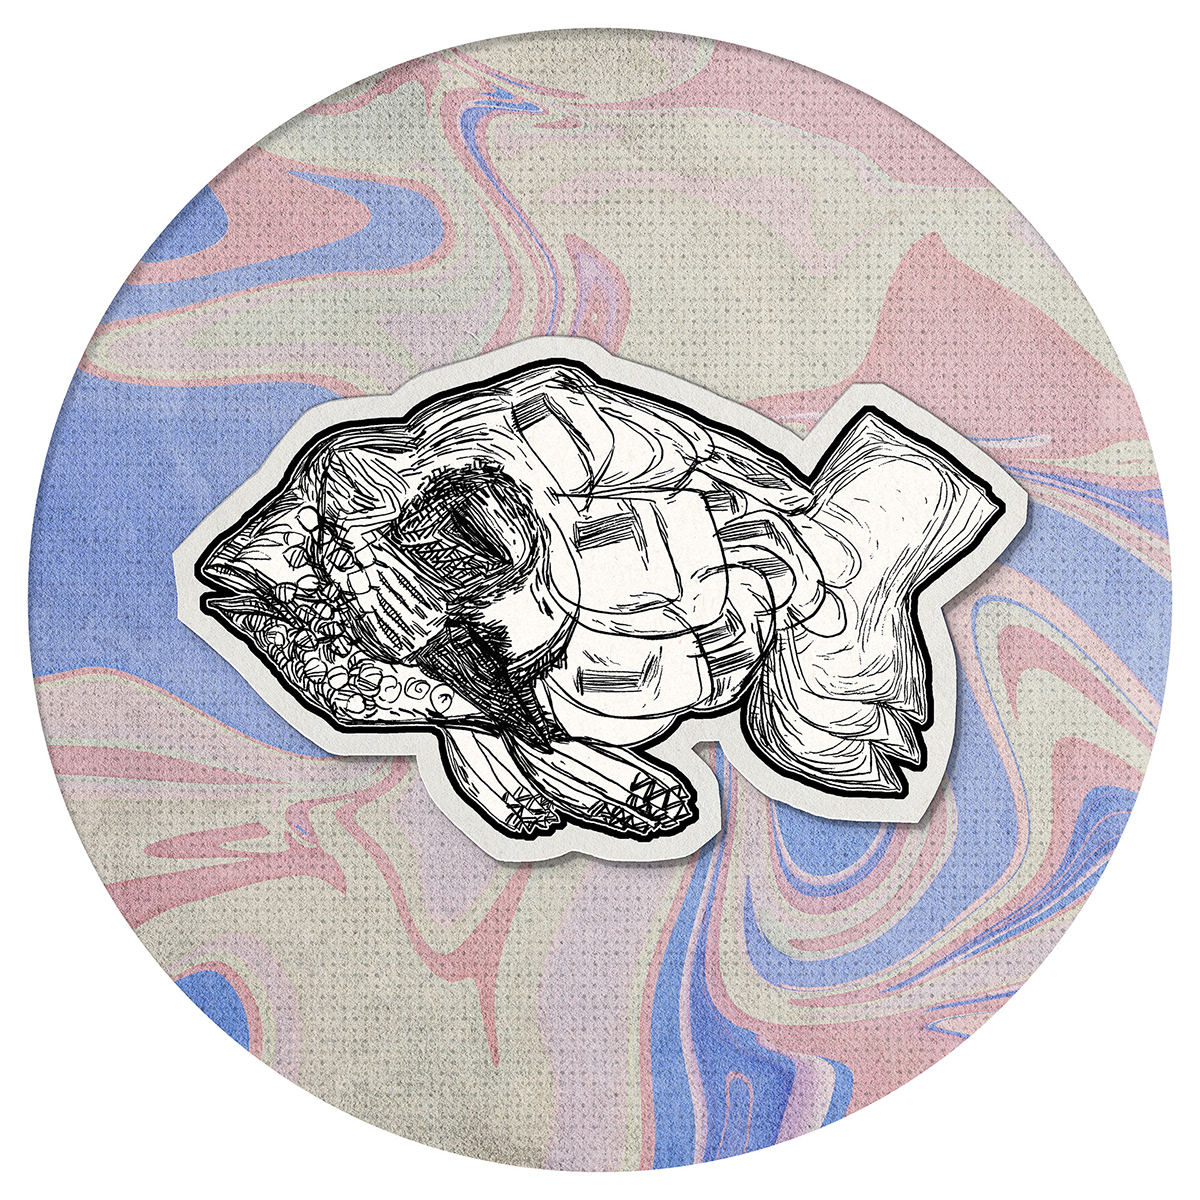 A hand-drawn bizarre fish created with graphite lines and placed on a psychedelic circle background.